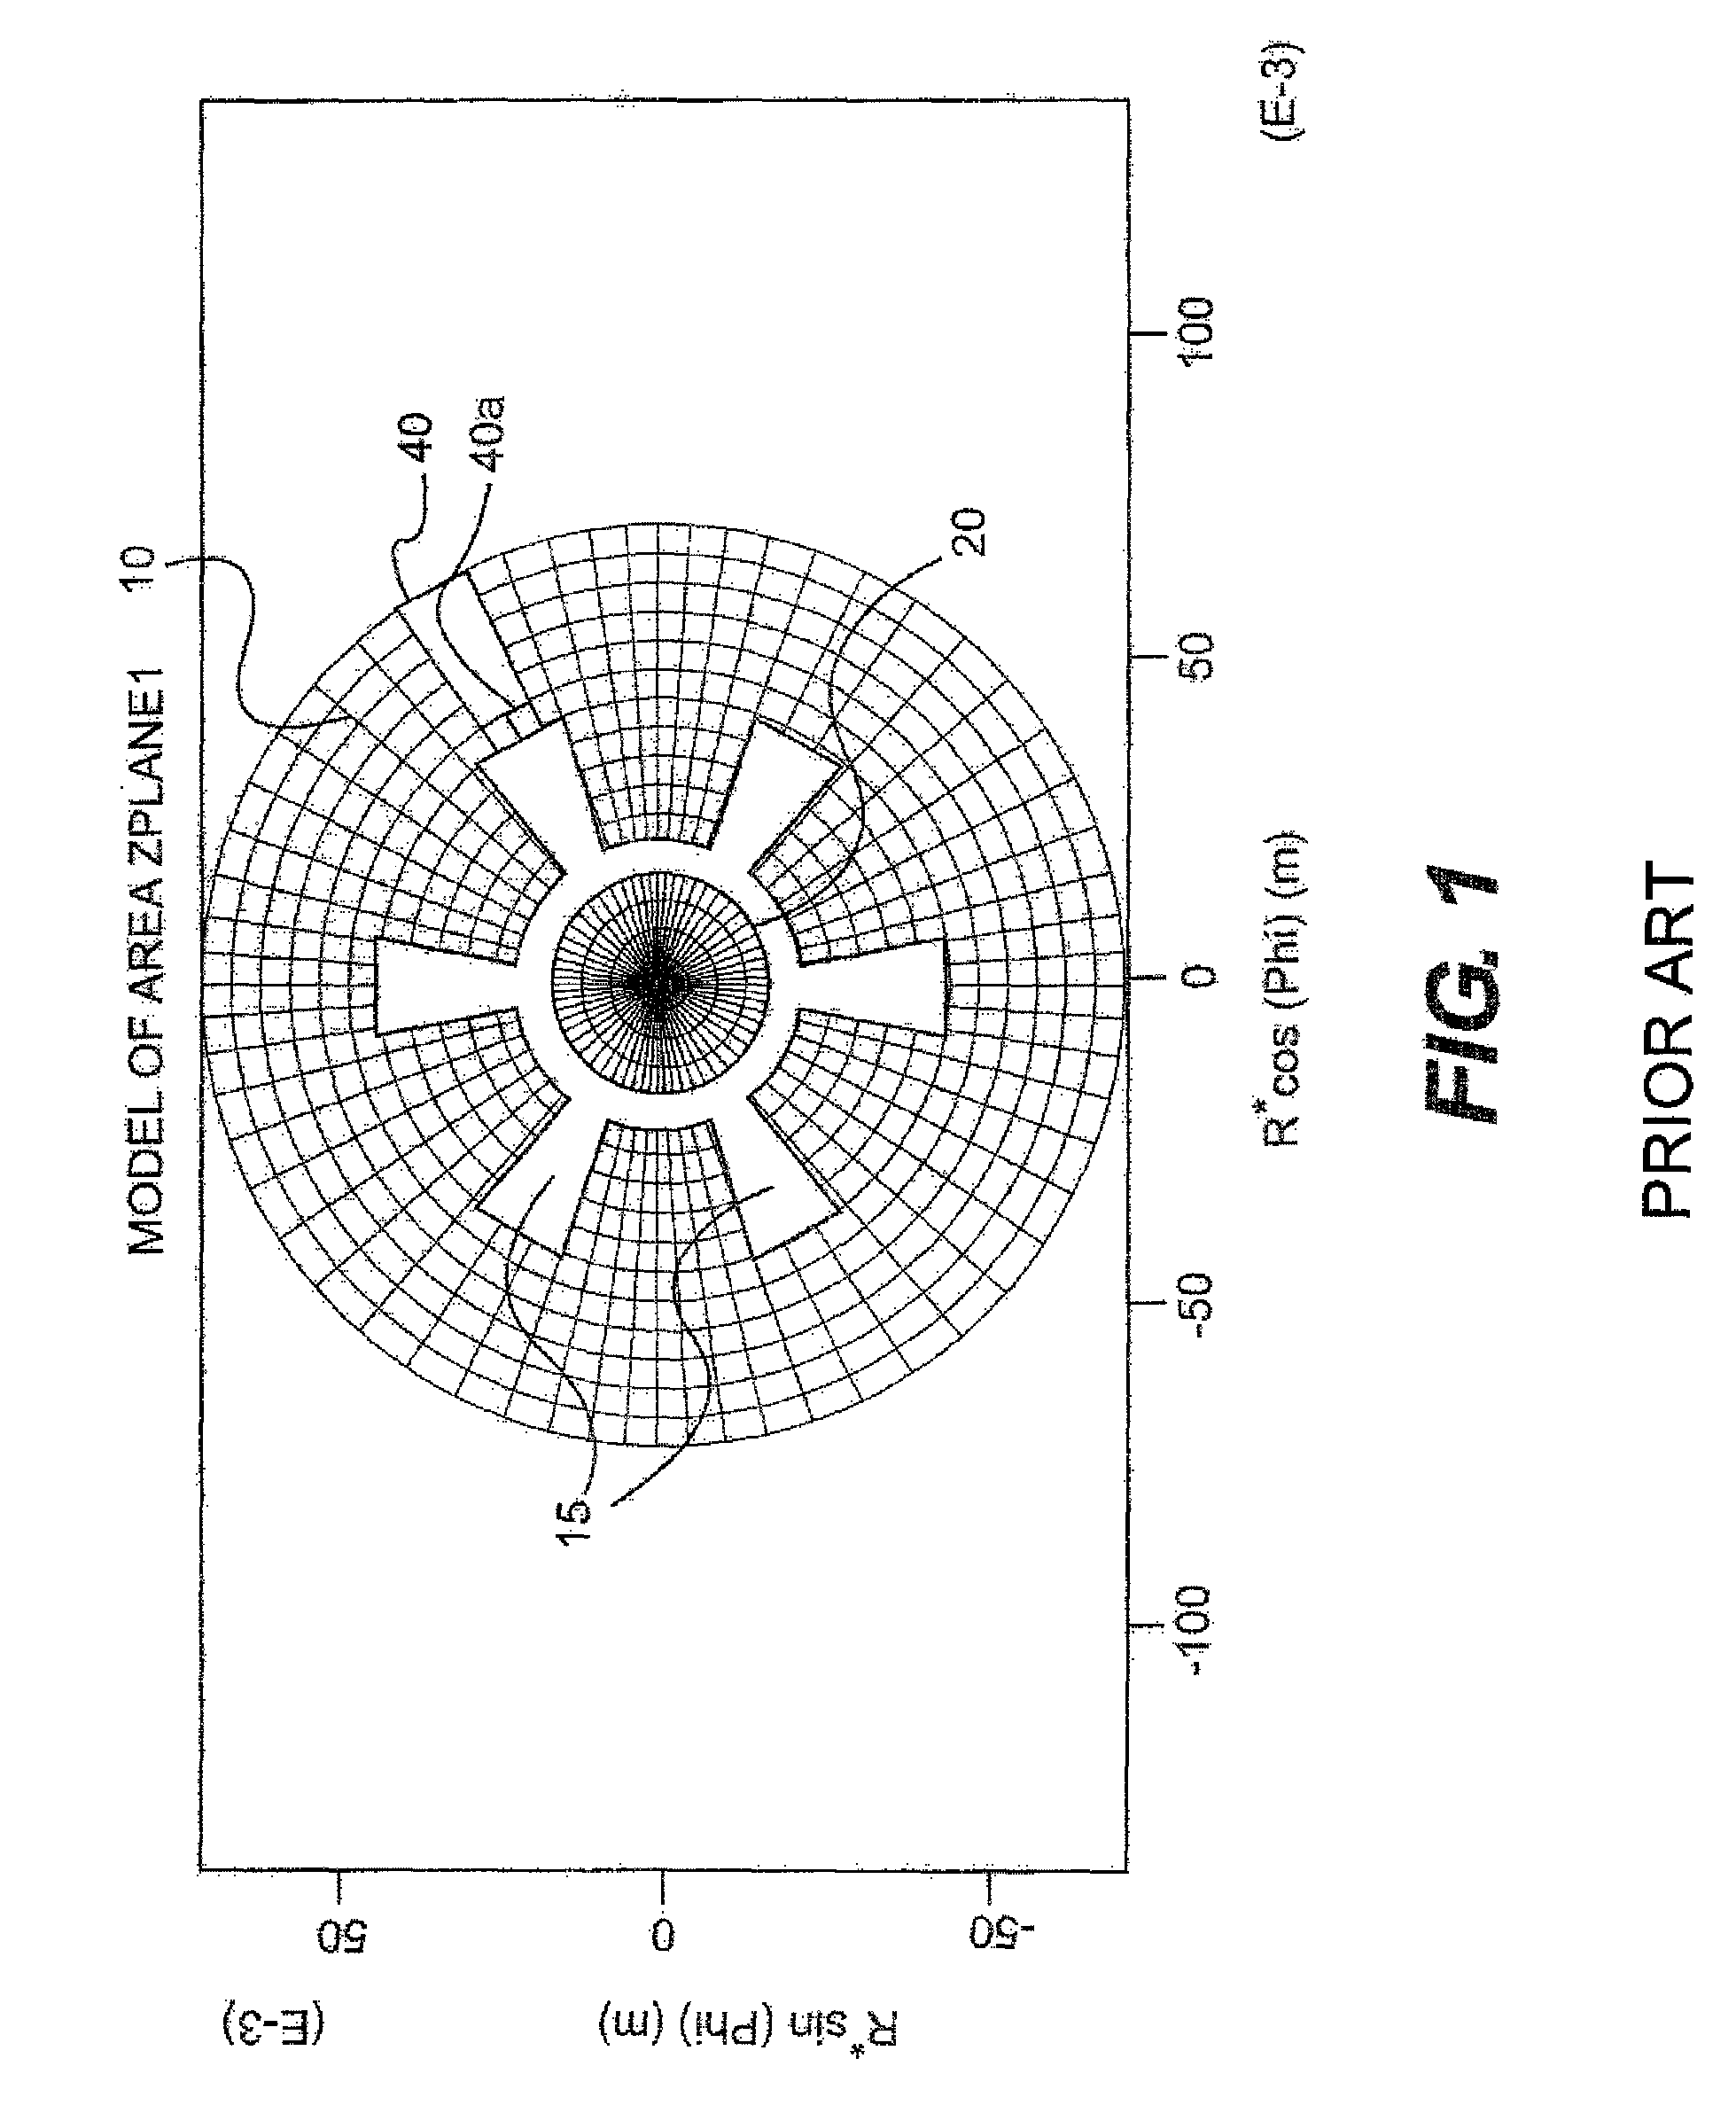 Magnetron having a transparent cathode and related methods of generating high power microwaves